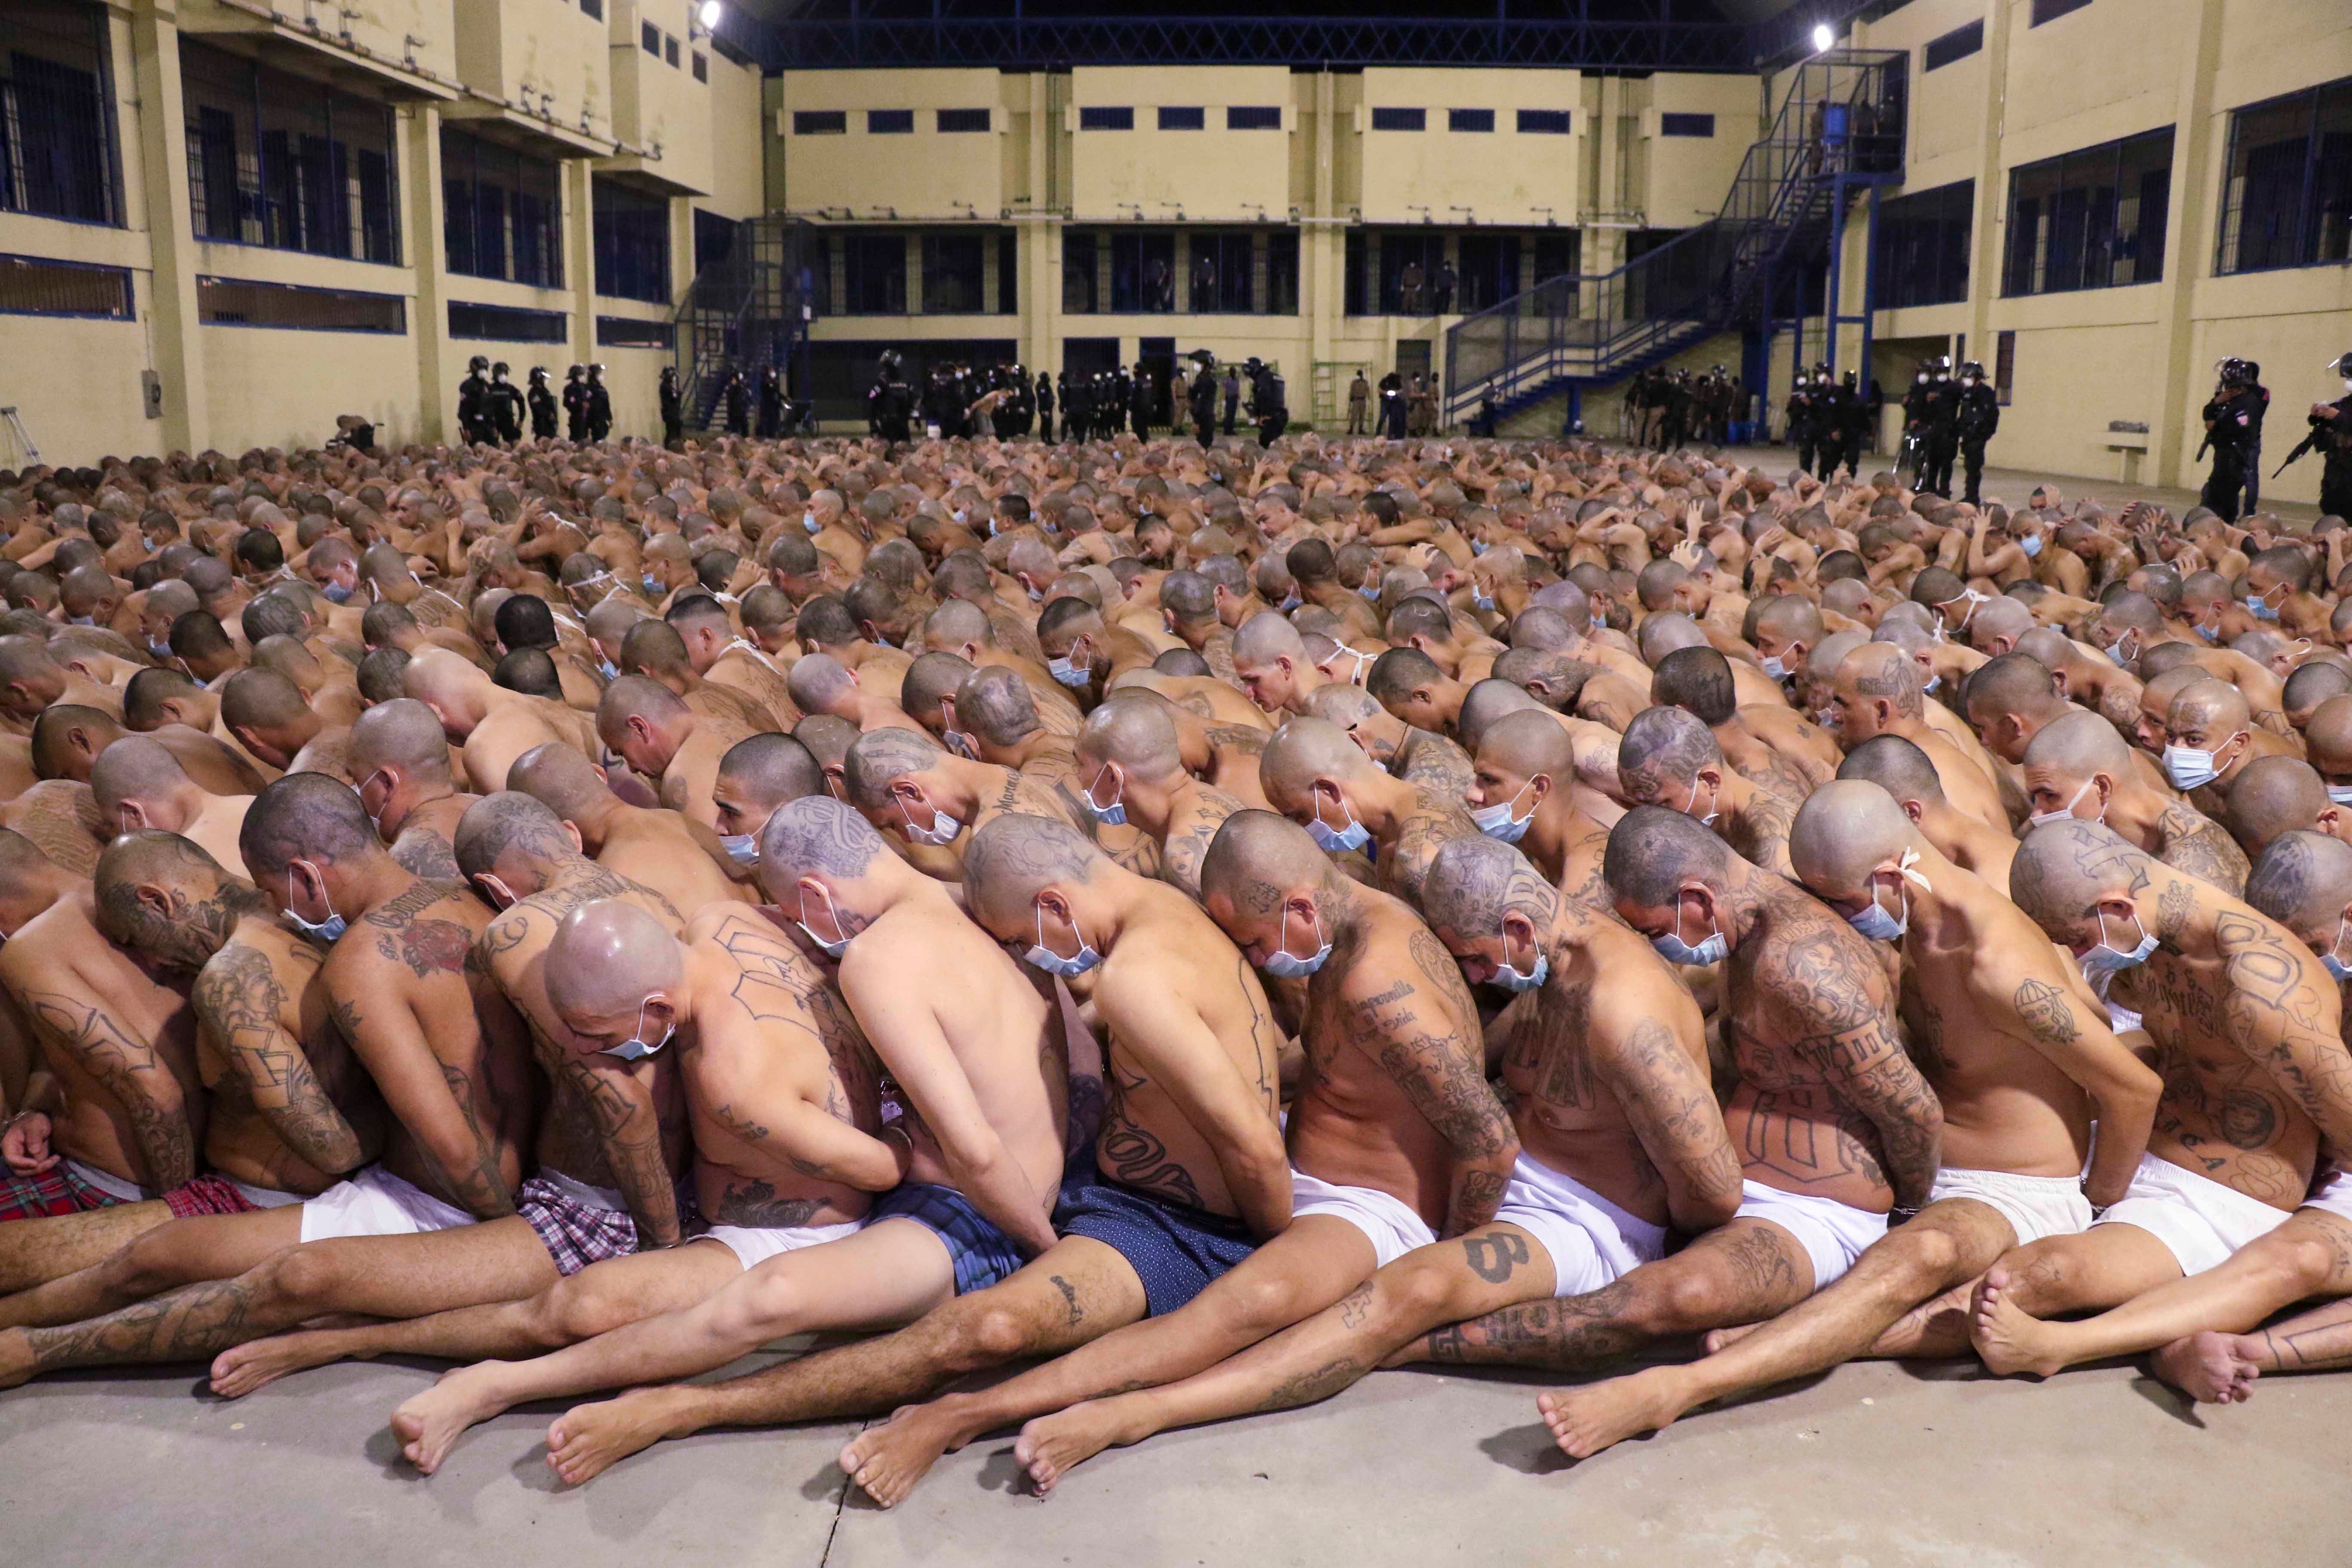 Inmates are lined up during a security operation under the watch of police at Izalco prison in San Salvador, El Salvador, on April 25, 2020.